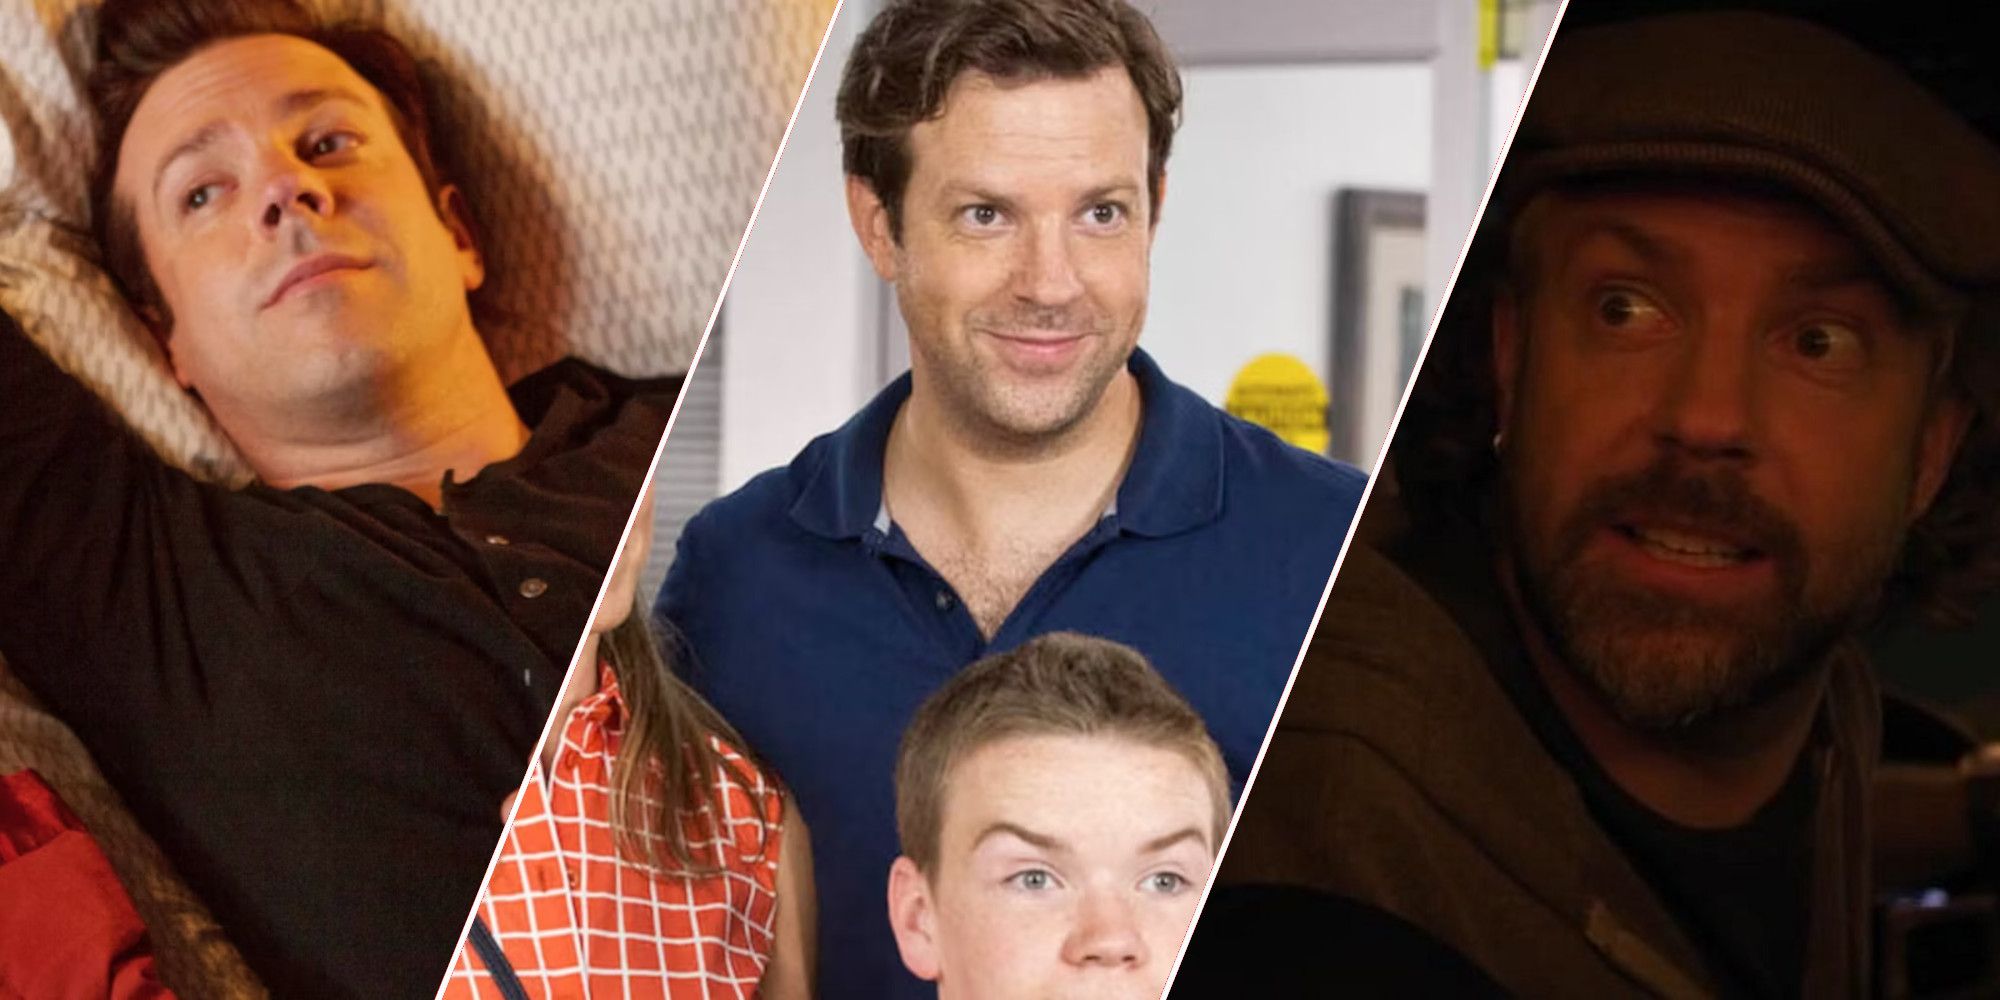 A collage of stills featuring actor Jason Sudeikis and his roles in 'Sleeping with Other People', 'We're the Millers', and 'Booksmart'